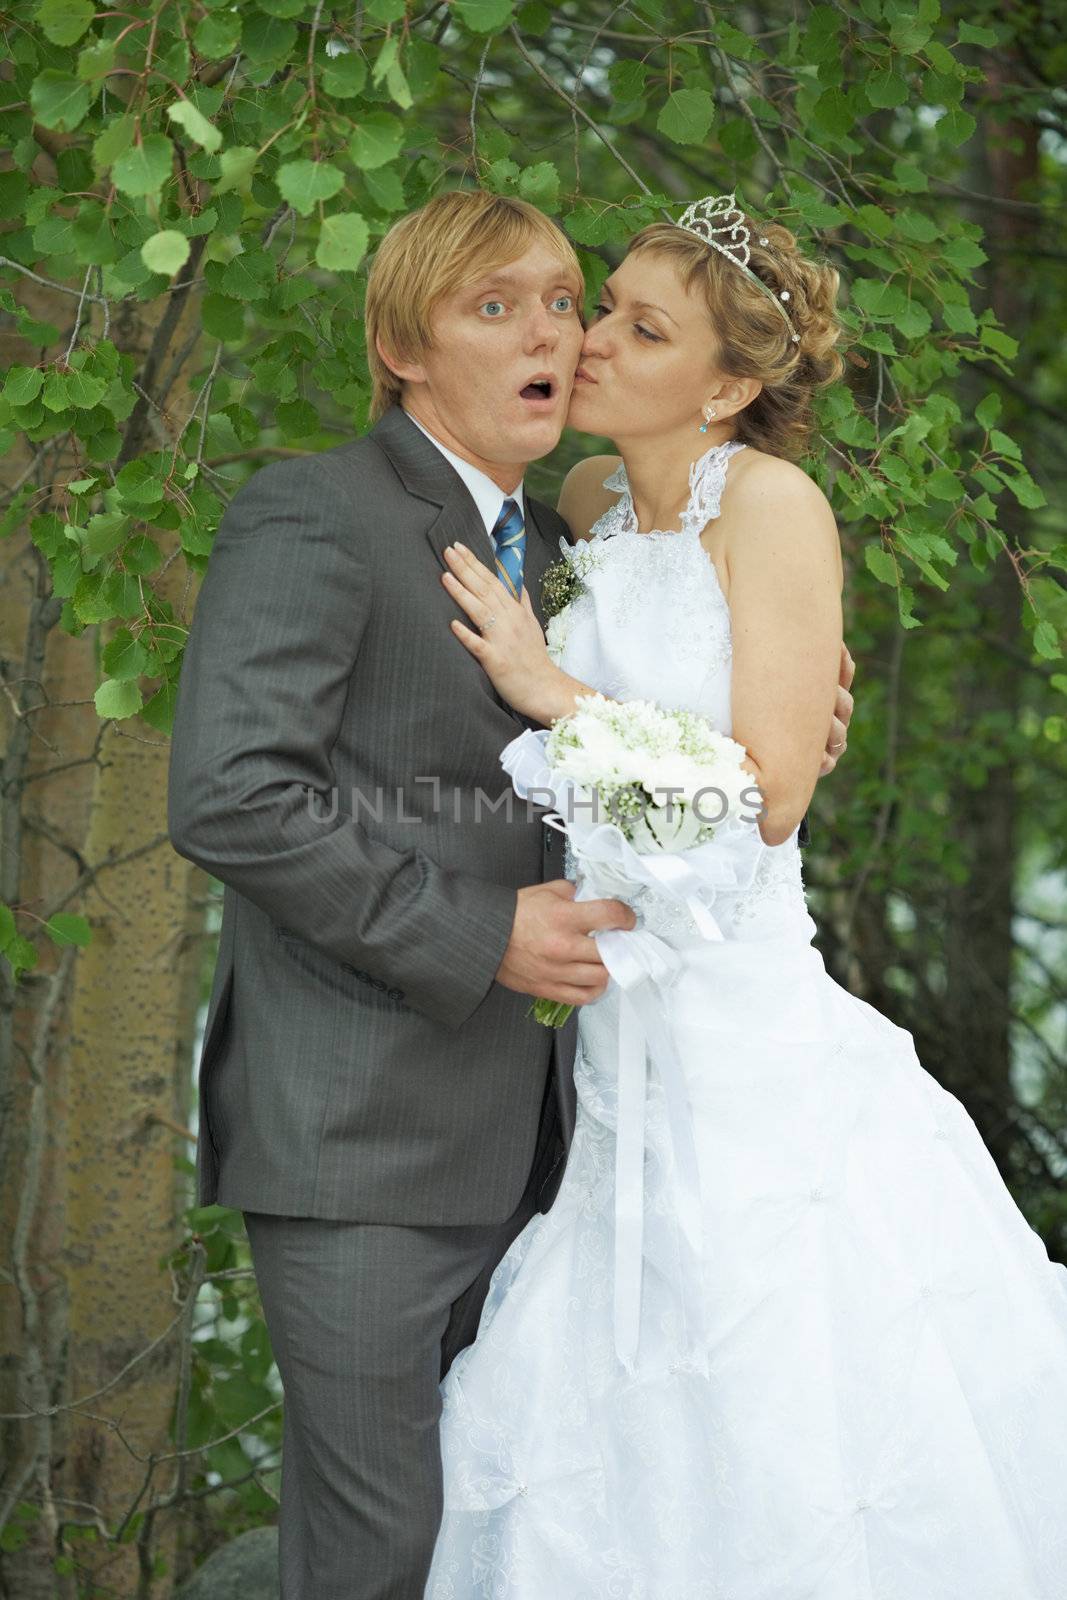 Amusing groom and the bride kiss secretly in bushes